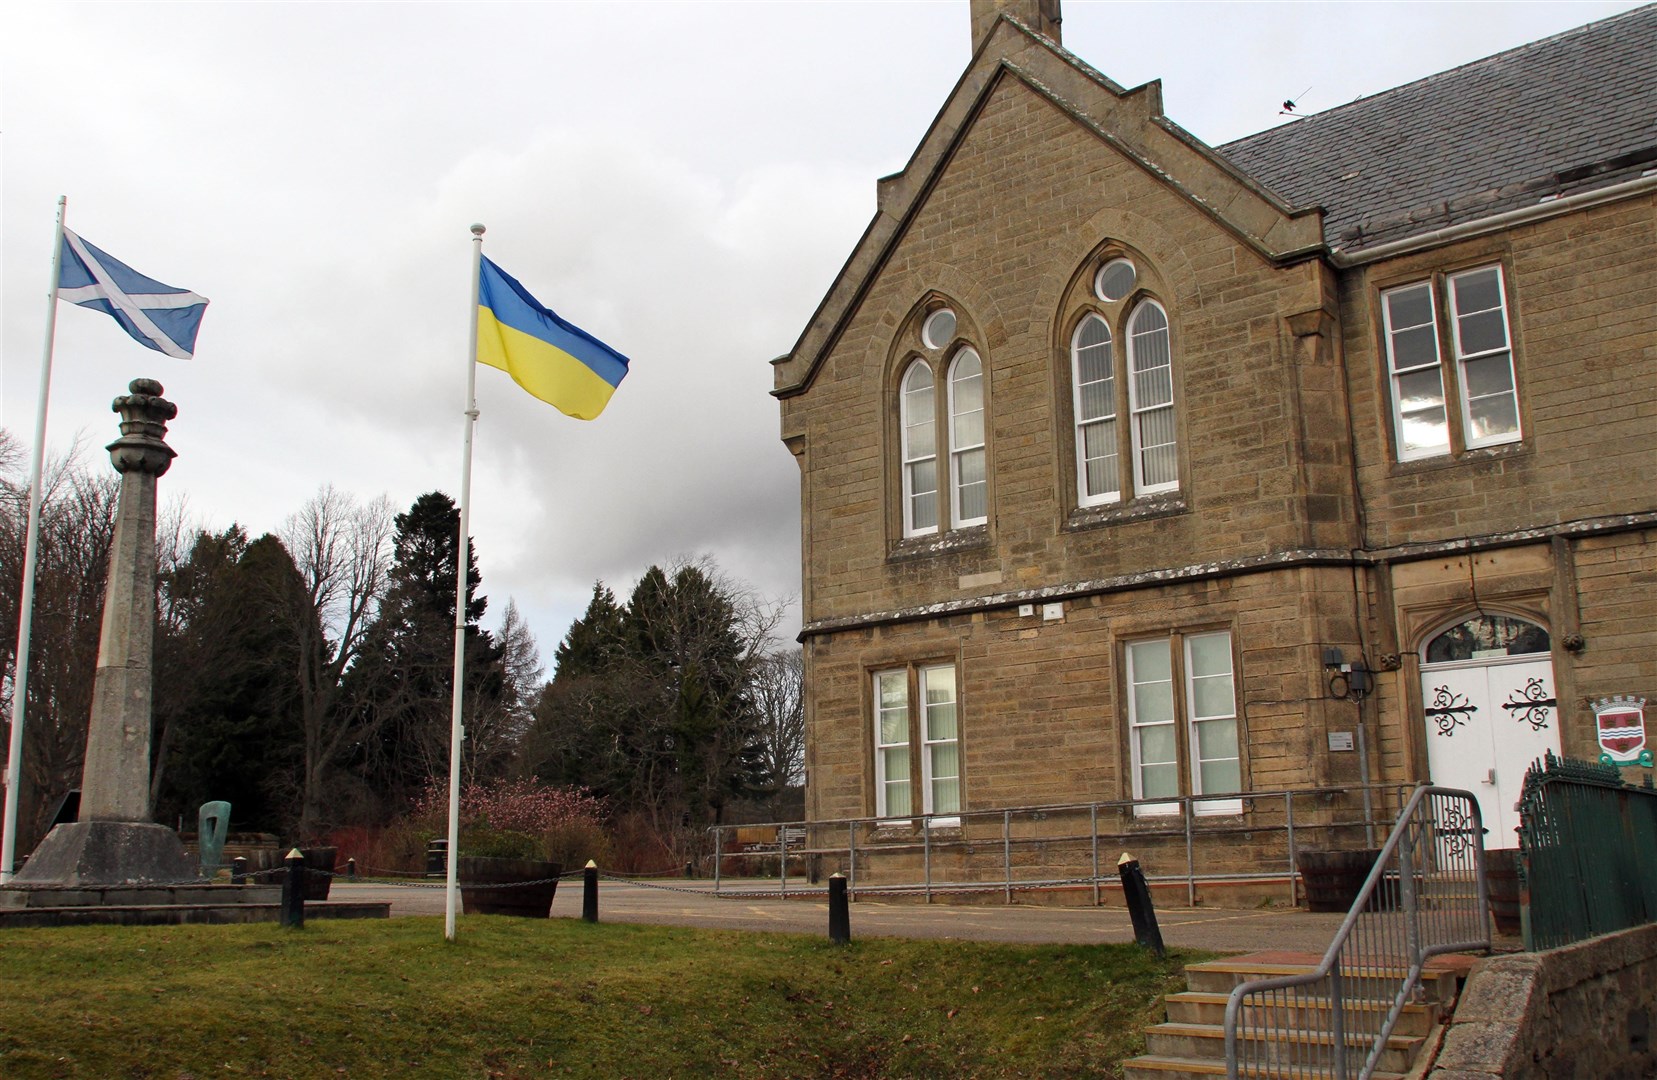 The Ukrainian flag flies side by side with the Saltire in front of the townhouse in Grantown.